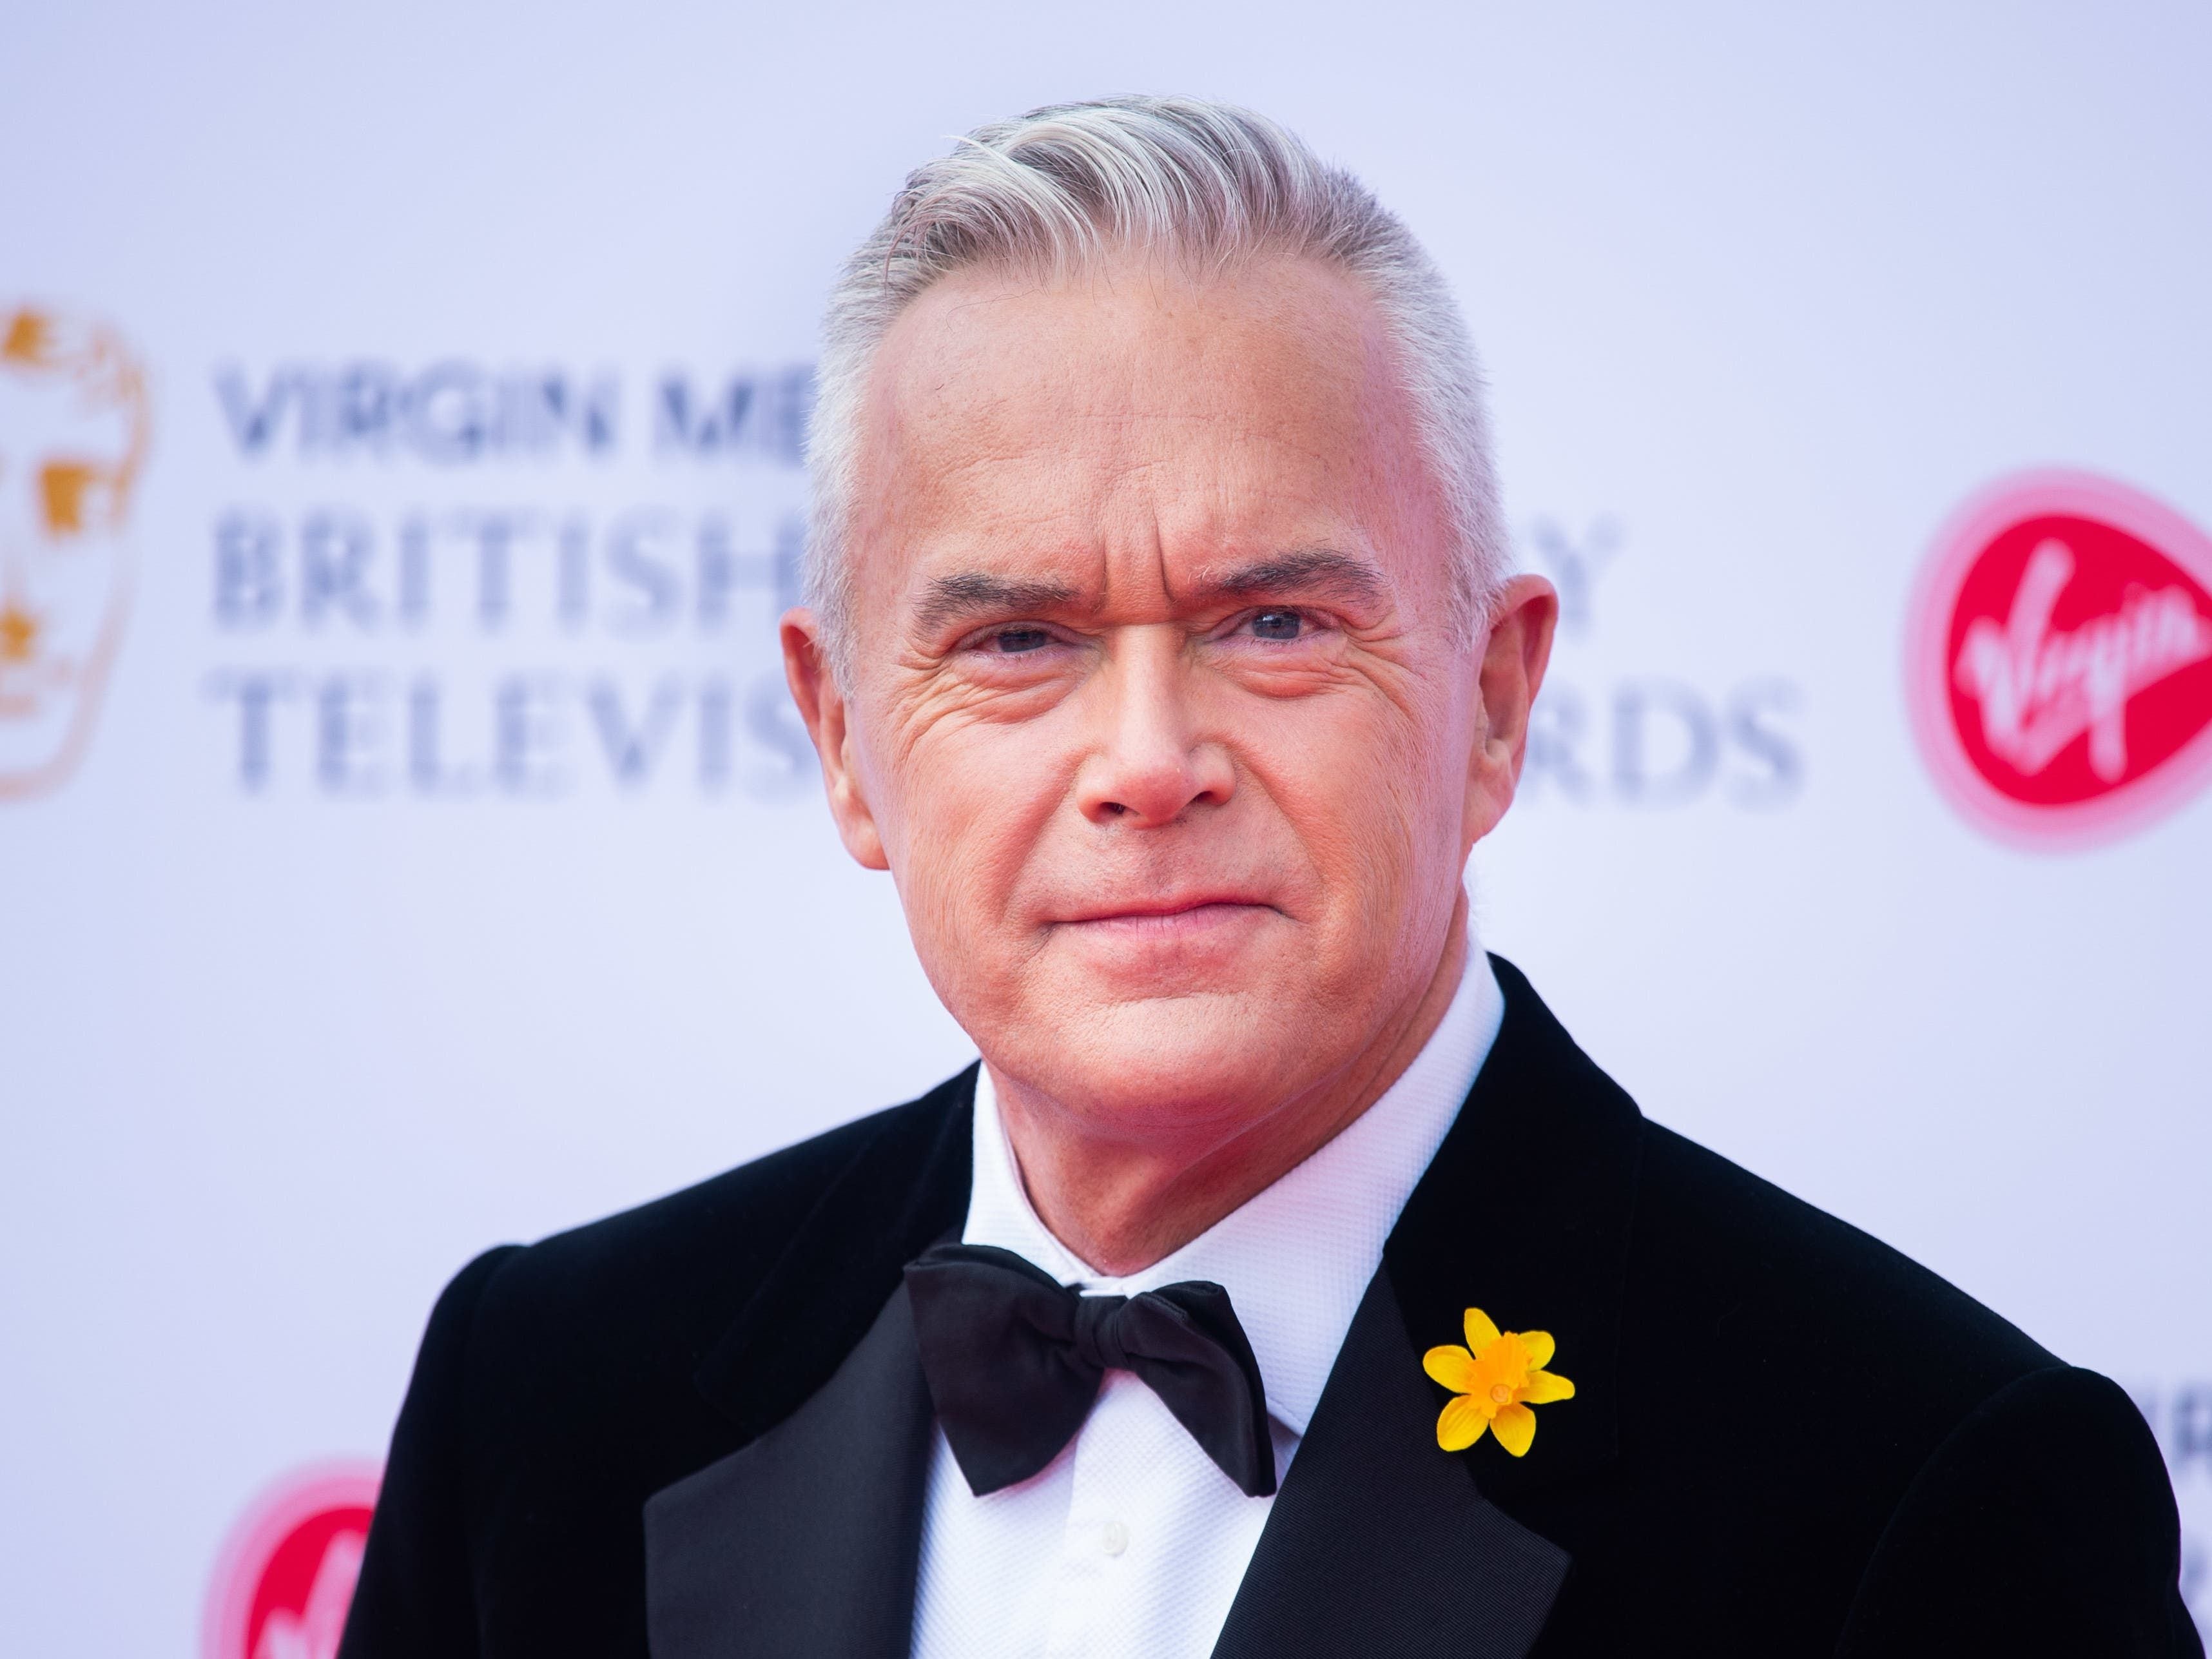 BBC should have been ‘more open’ amid Huw Edwards probe, says ex-BBC executive